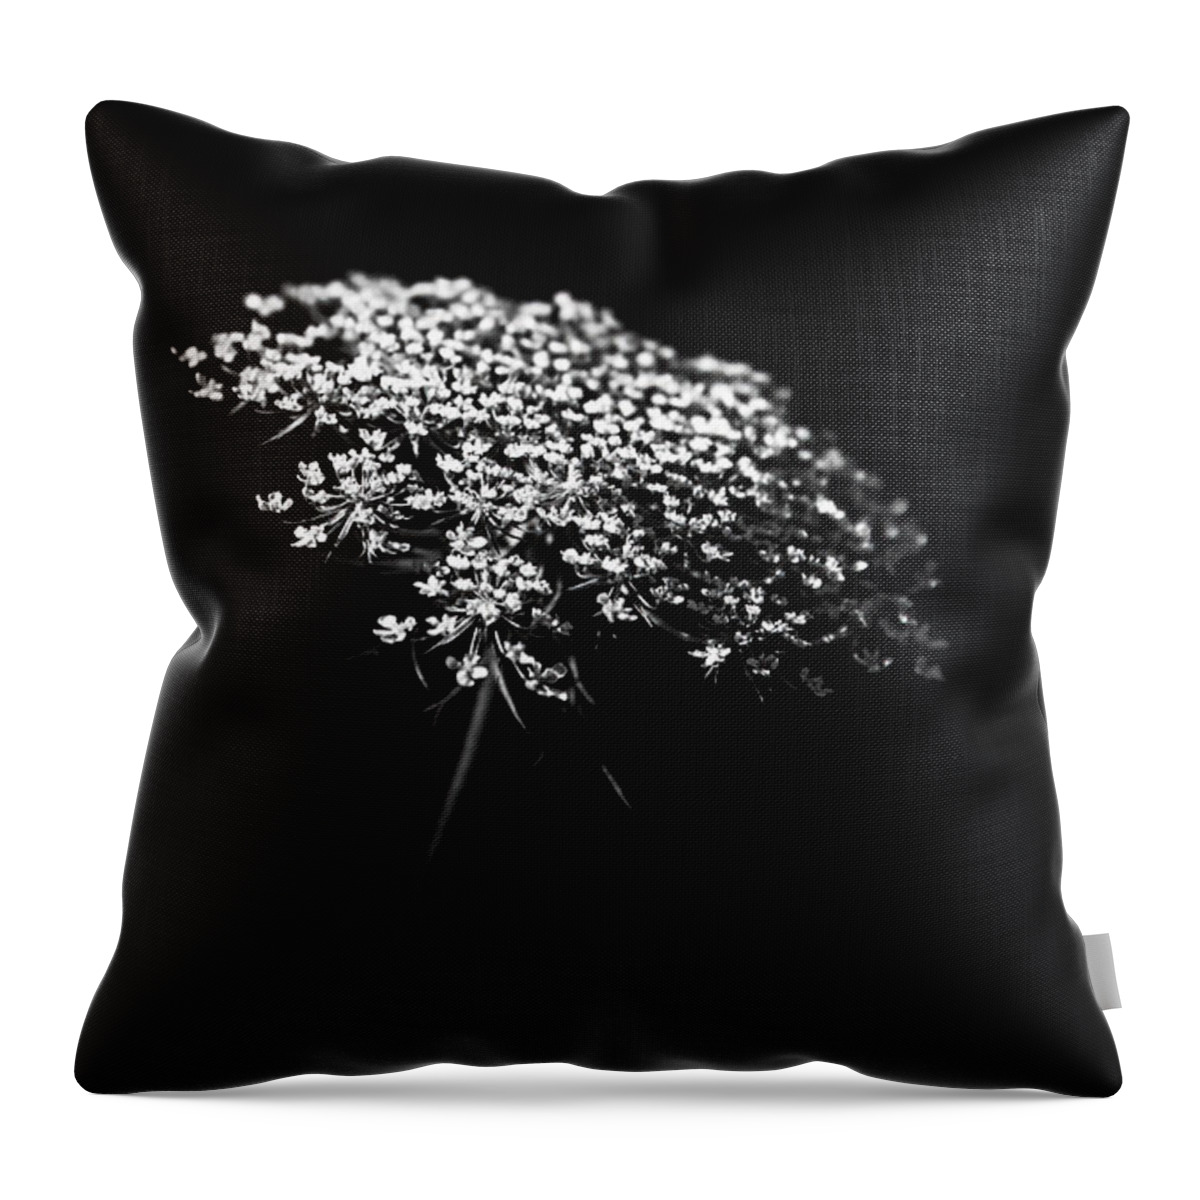 Queen Annes Lace Throw Pillow featuring the photograph Queen Anne's Lace by Holly Ross